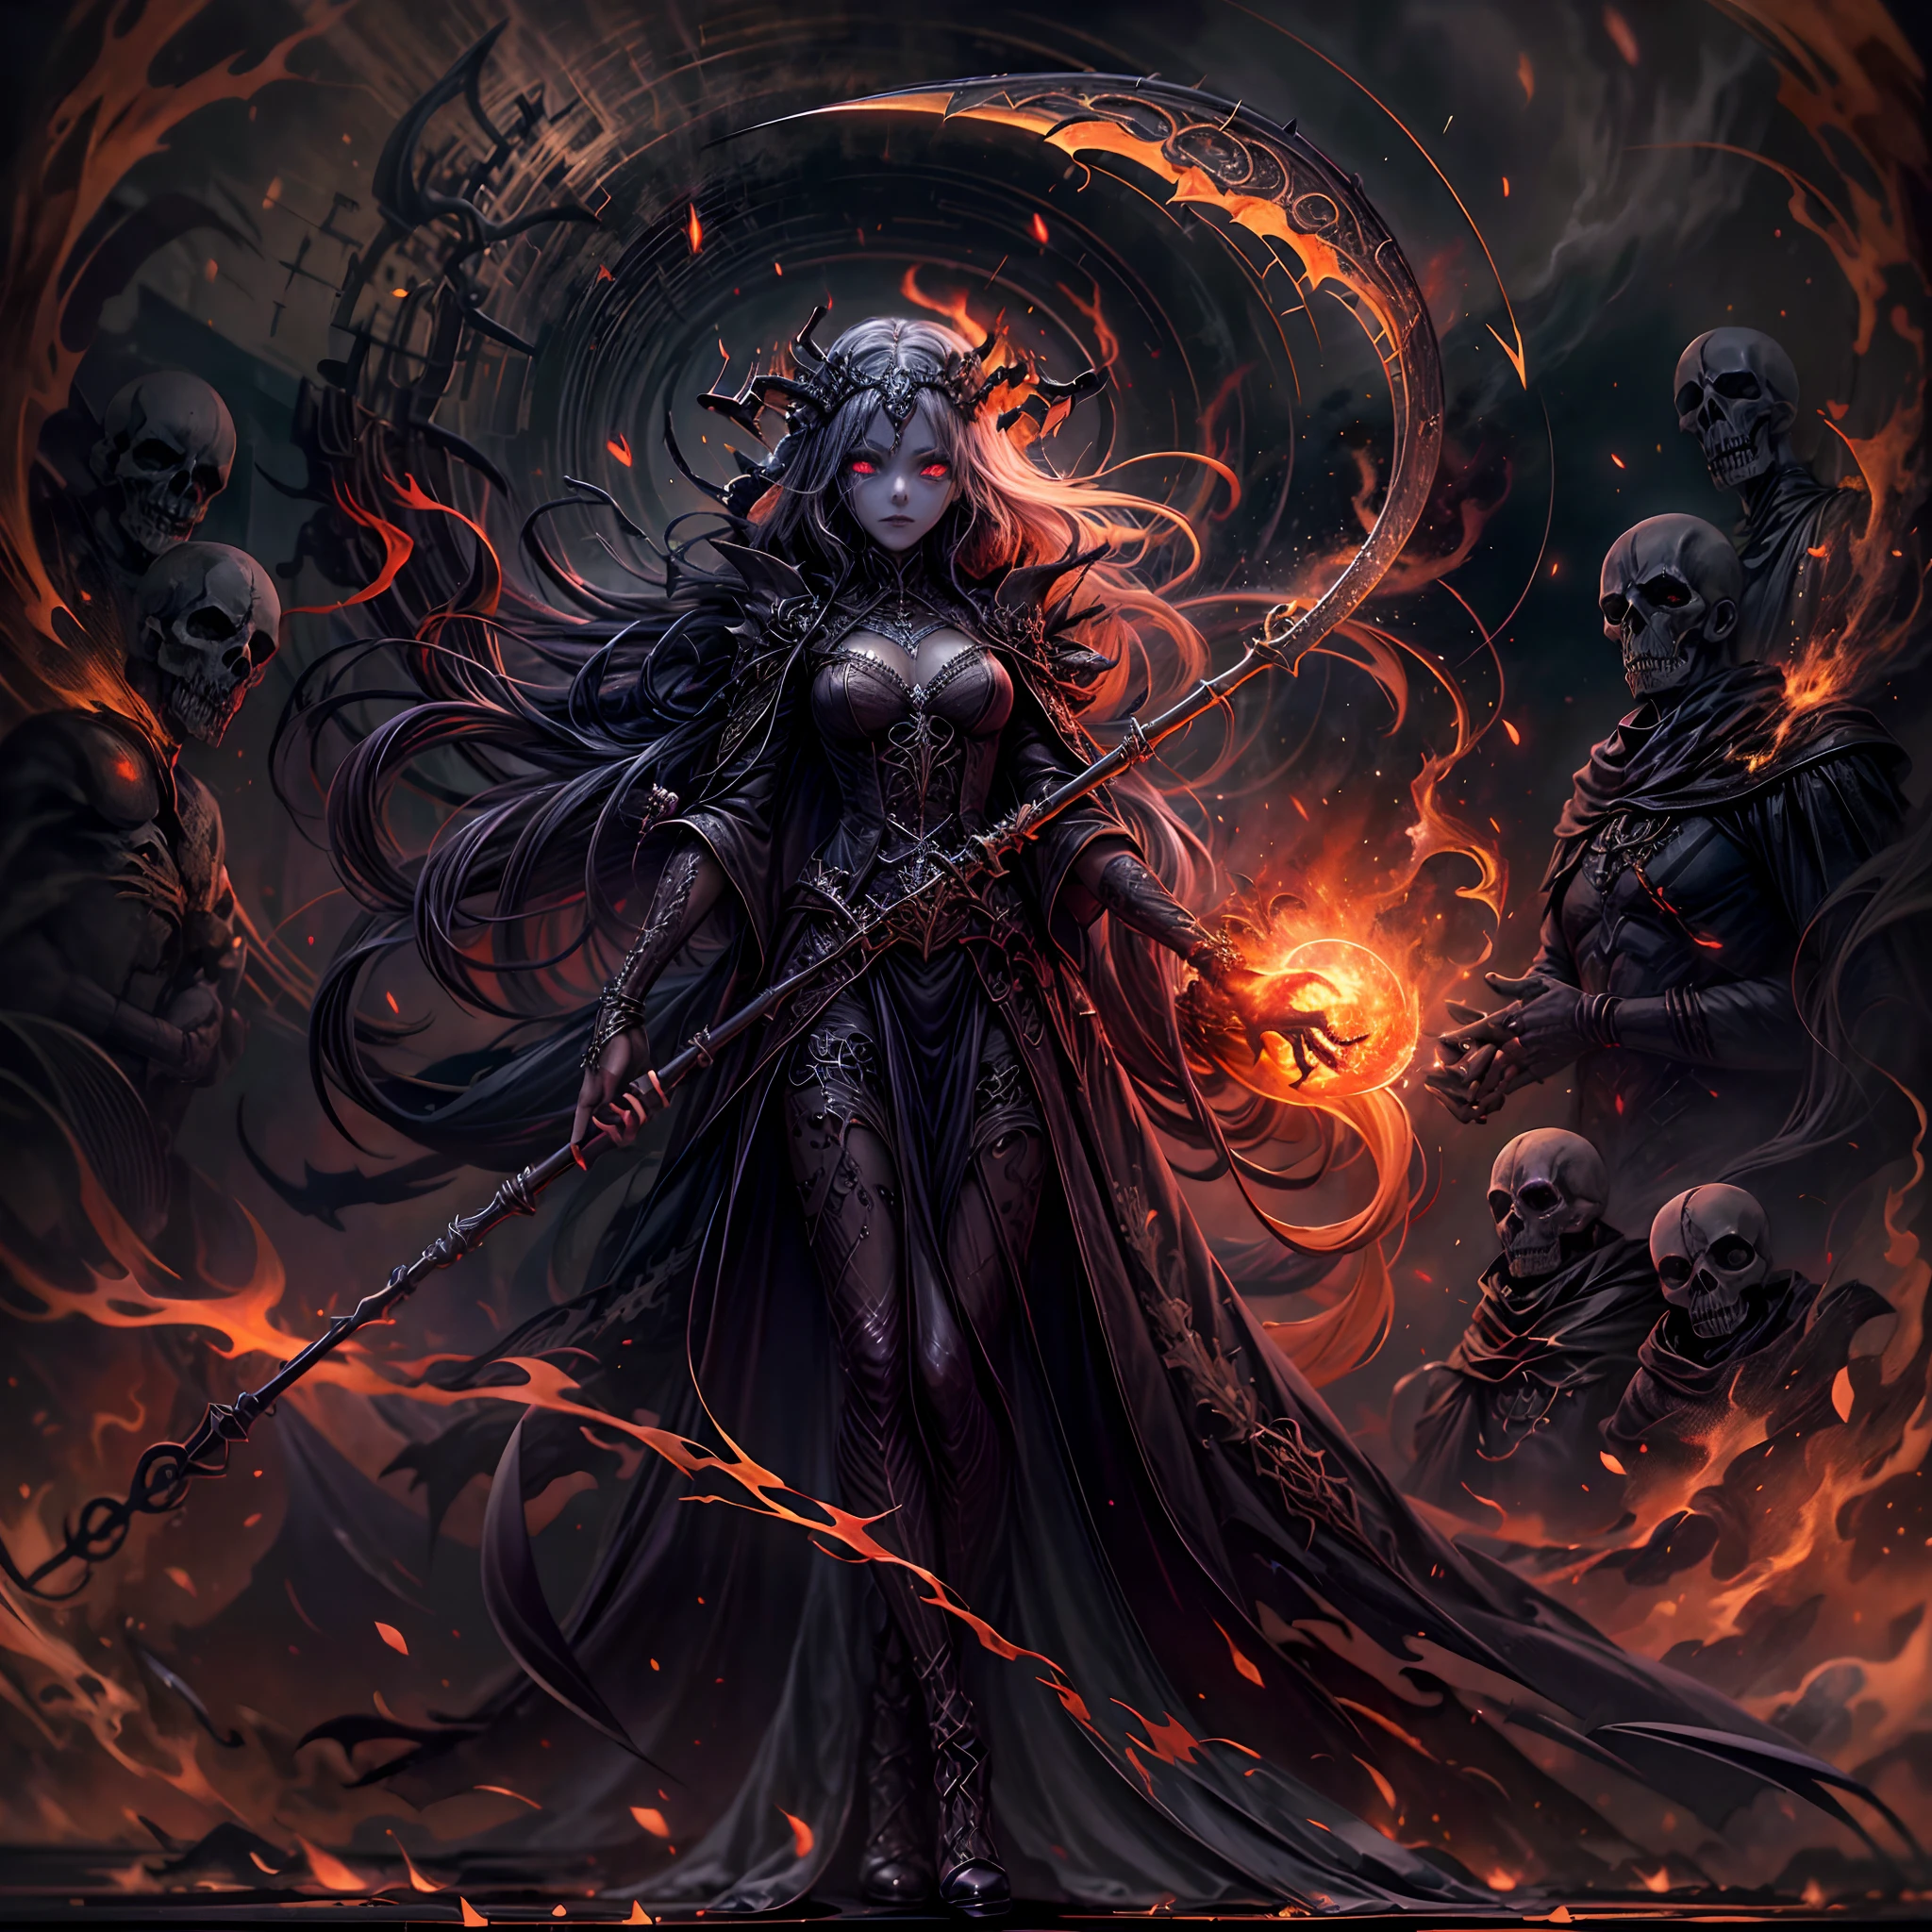 death's scythe with flames, death goddess, dark intricate background, grim reaper, fiery aura, ethereal presence, ominous shadows, haunting atmosphere, macabre beauty, swirling smoke, menacing silhouette, glowing embers, mystical and foreboding, eerie glow of moonlight, foretelling doom, spectral figures, chilling winds, otherworldly realm.